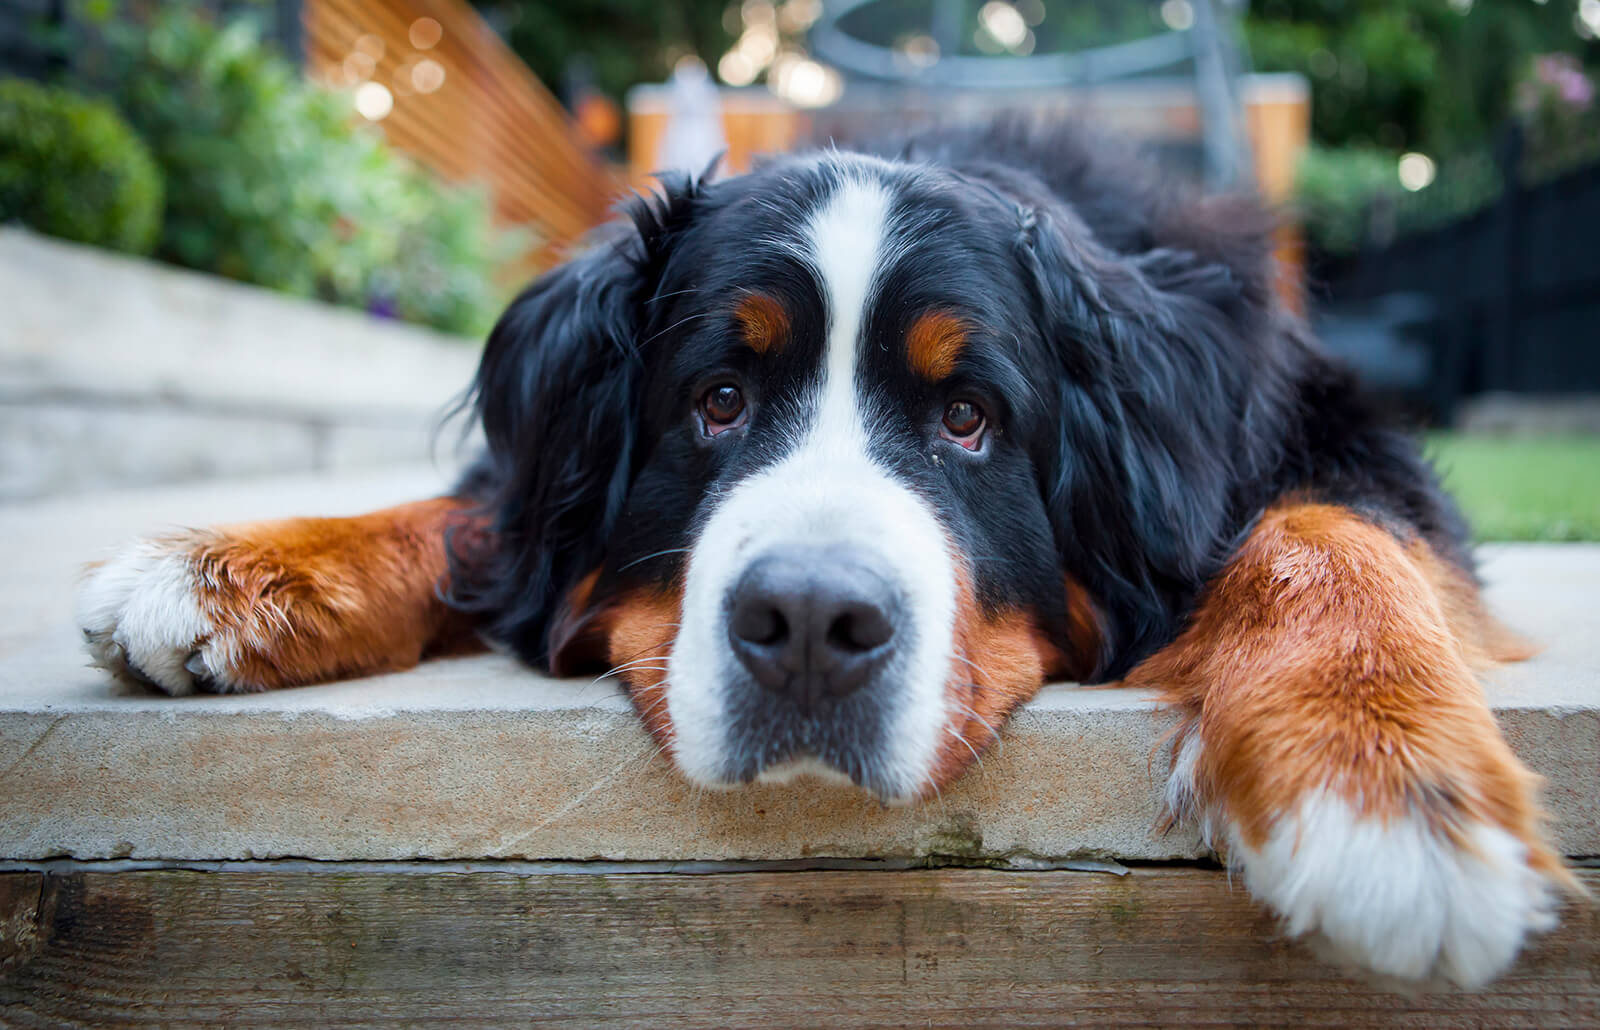 How quickly do Bernese mountain dogs grow?